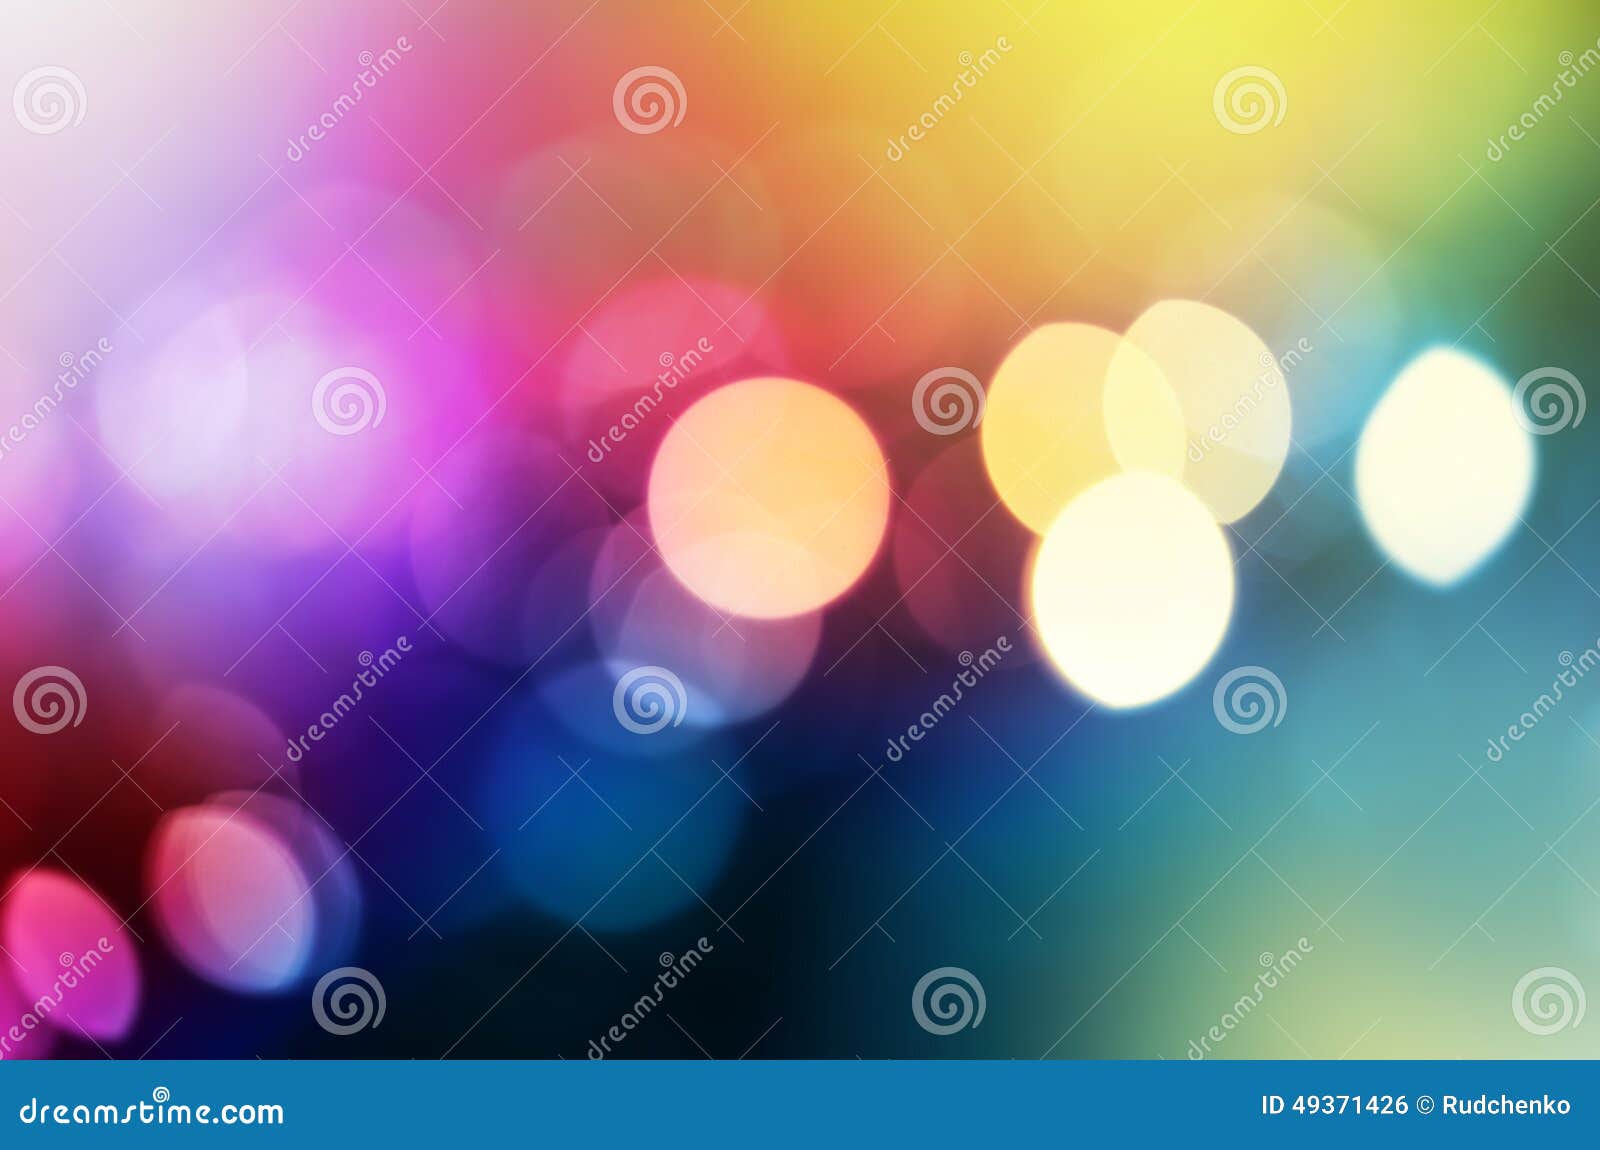 abstract city lights blur blinking background.